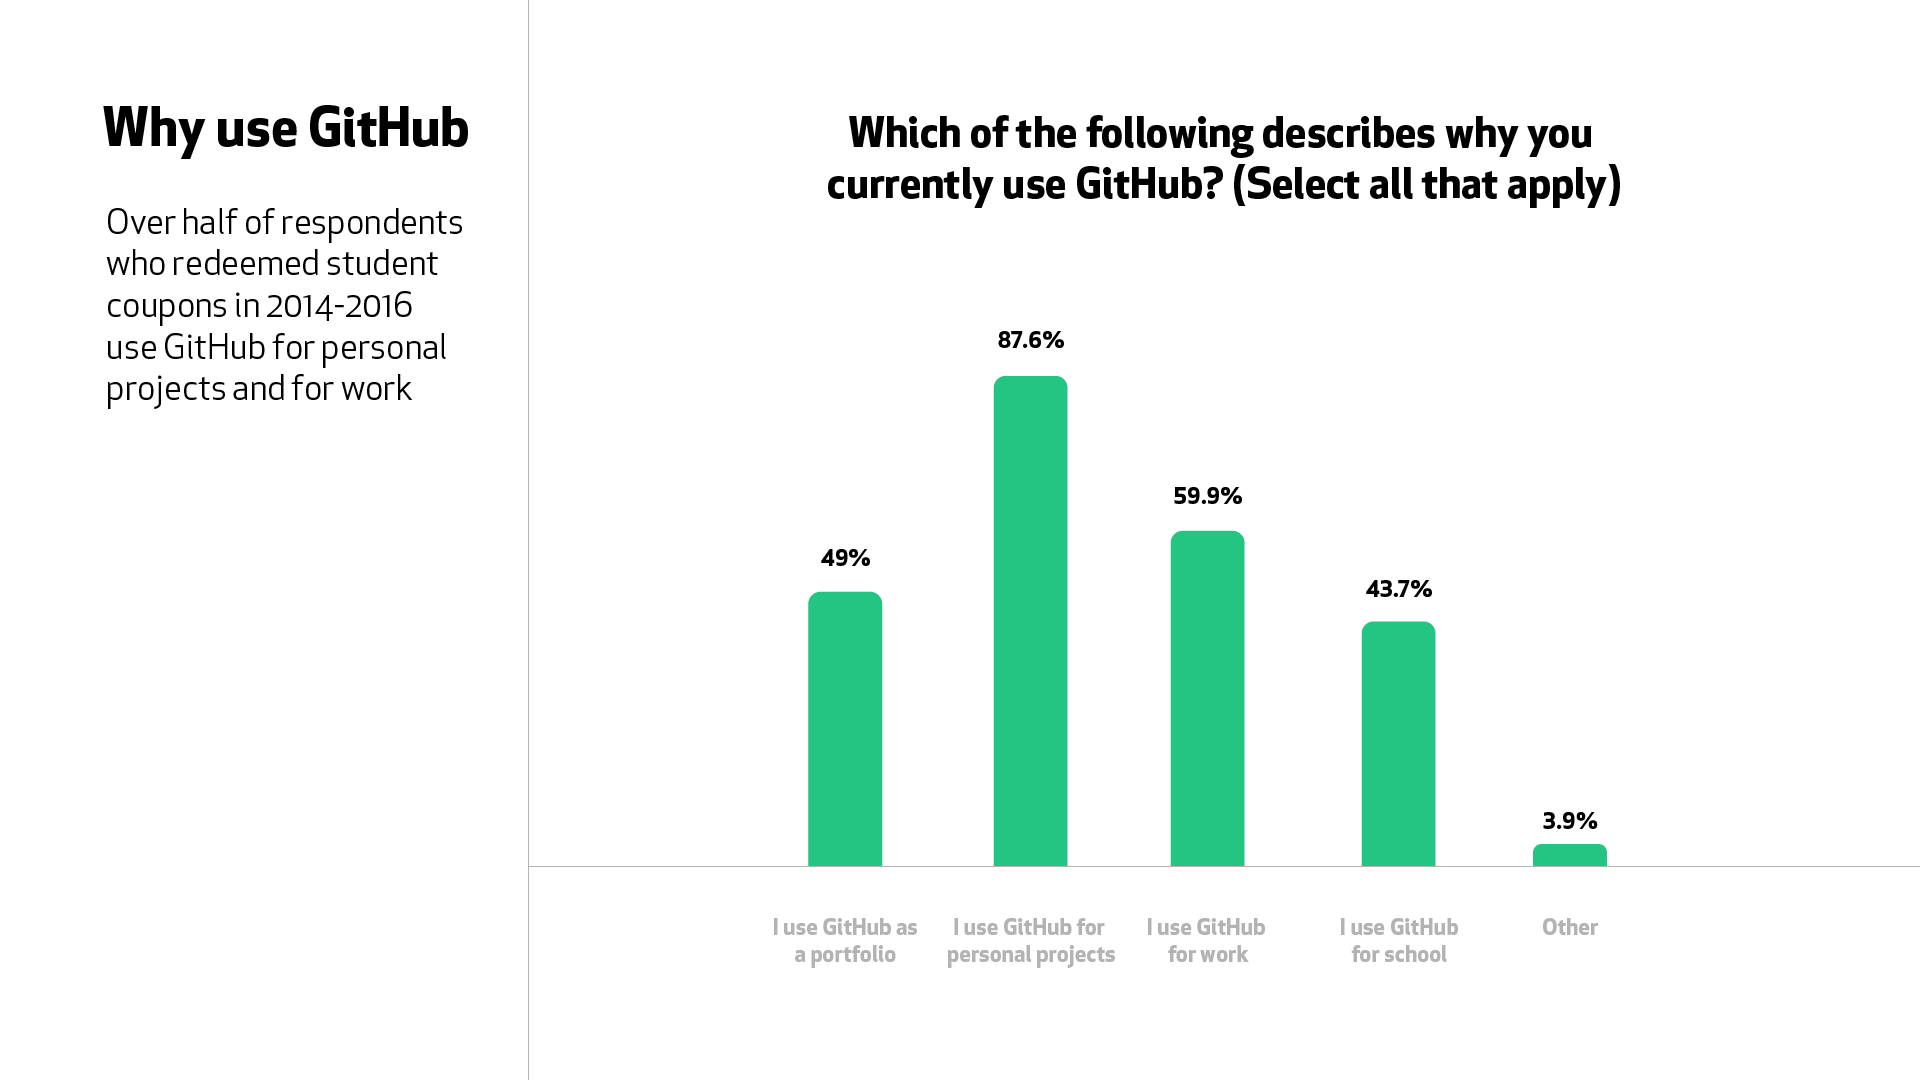 A graph for the question, “Which of the following describes why you currently use GitHub?” 49% use it as a portfolio, 87.6% use it for personal projects, 59.9% use it for work, and 43.7% use it for school.